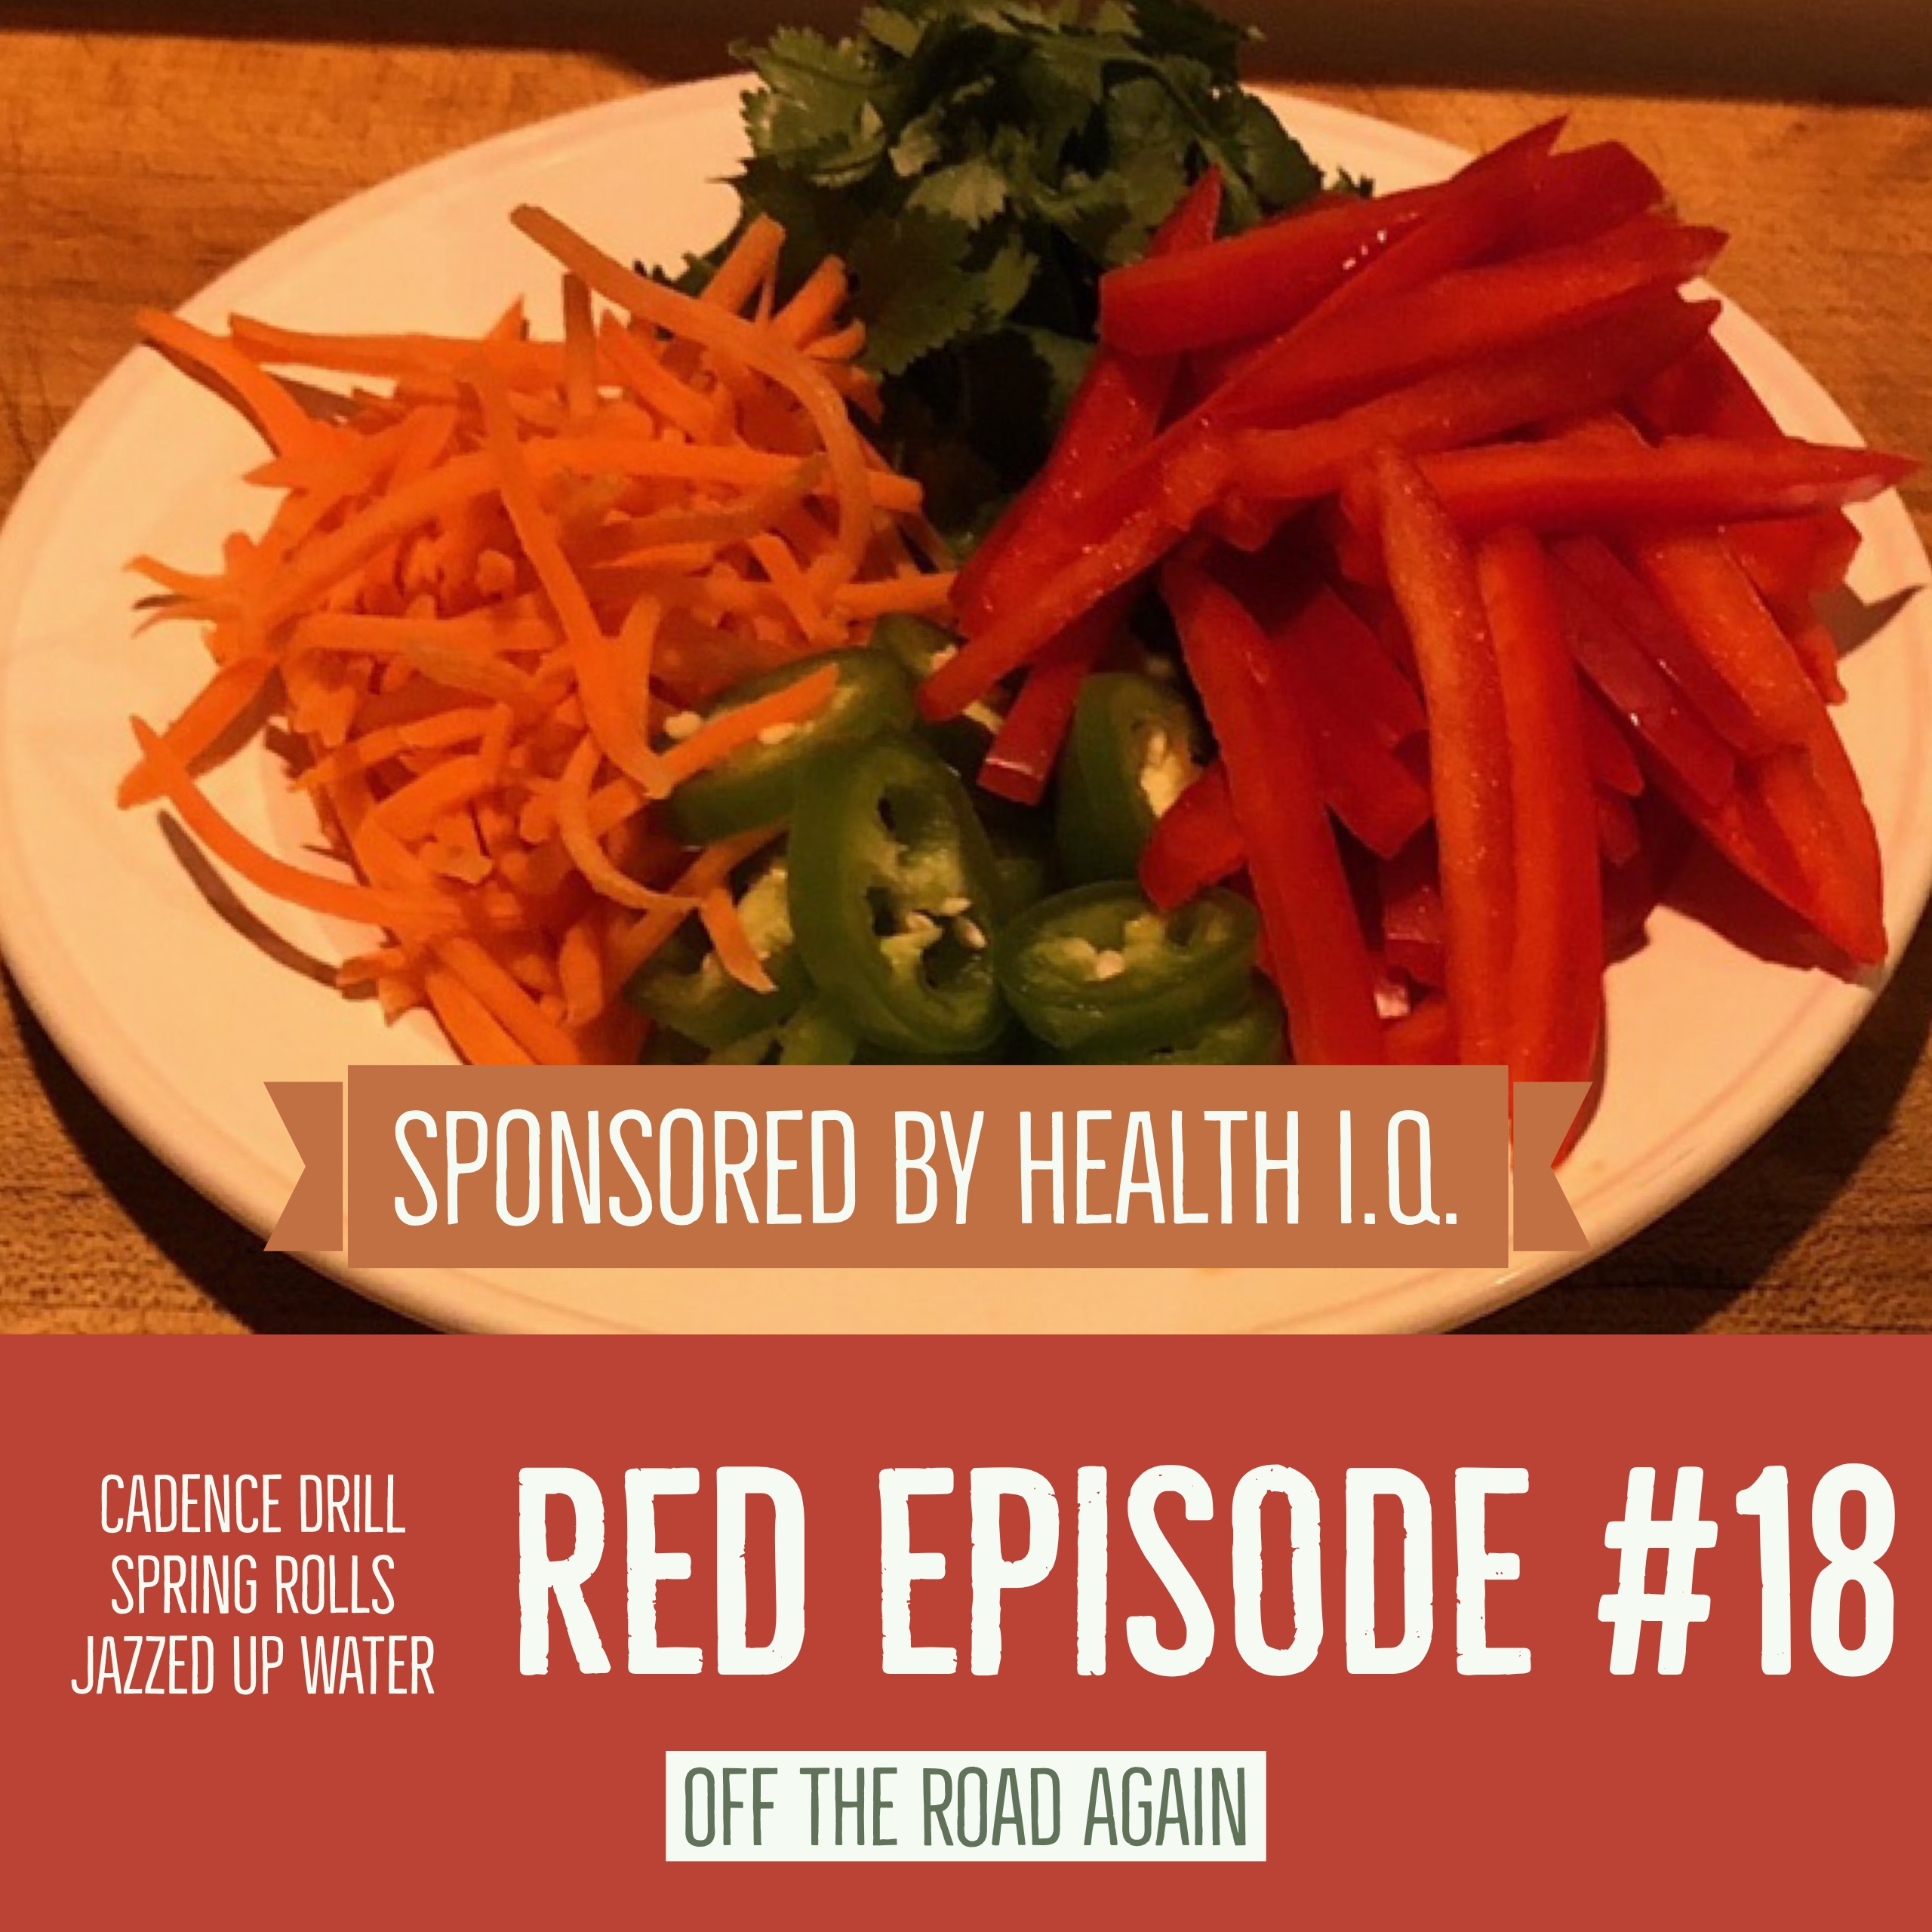 RED Episode #18:  Off the Road Again